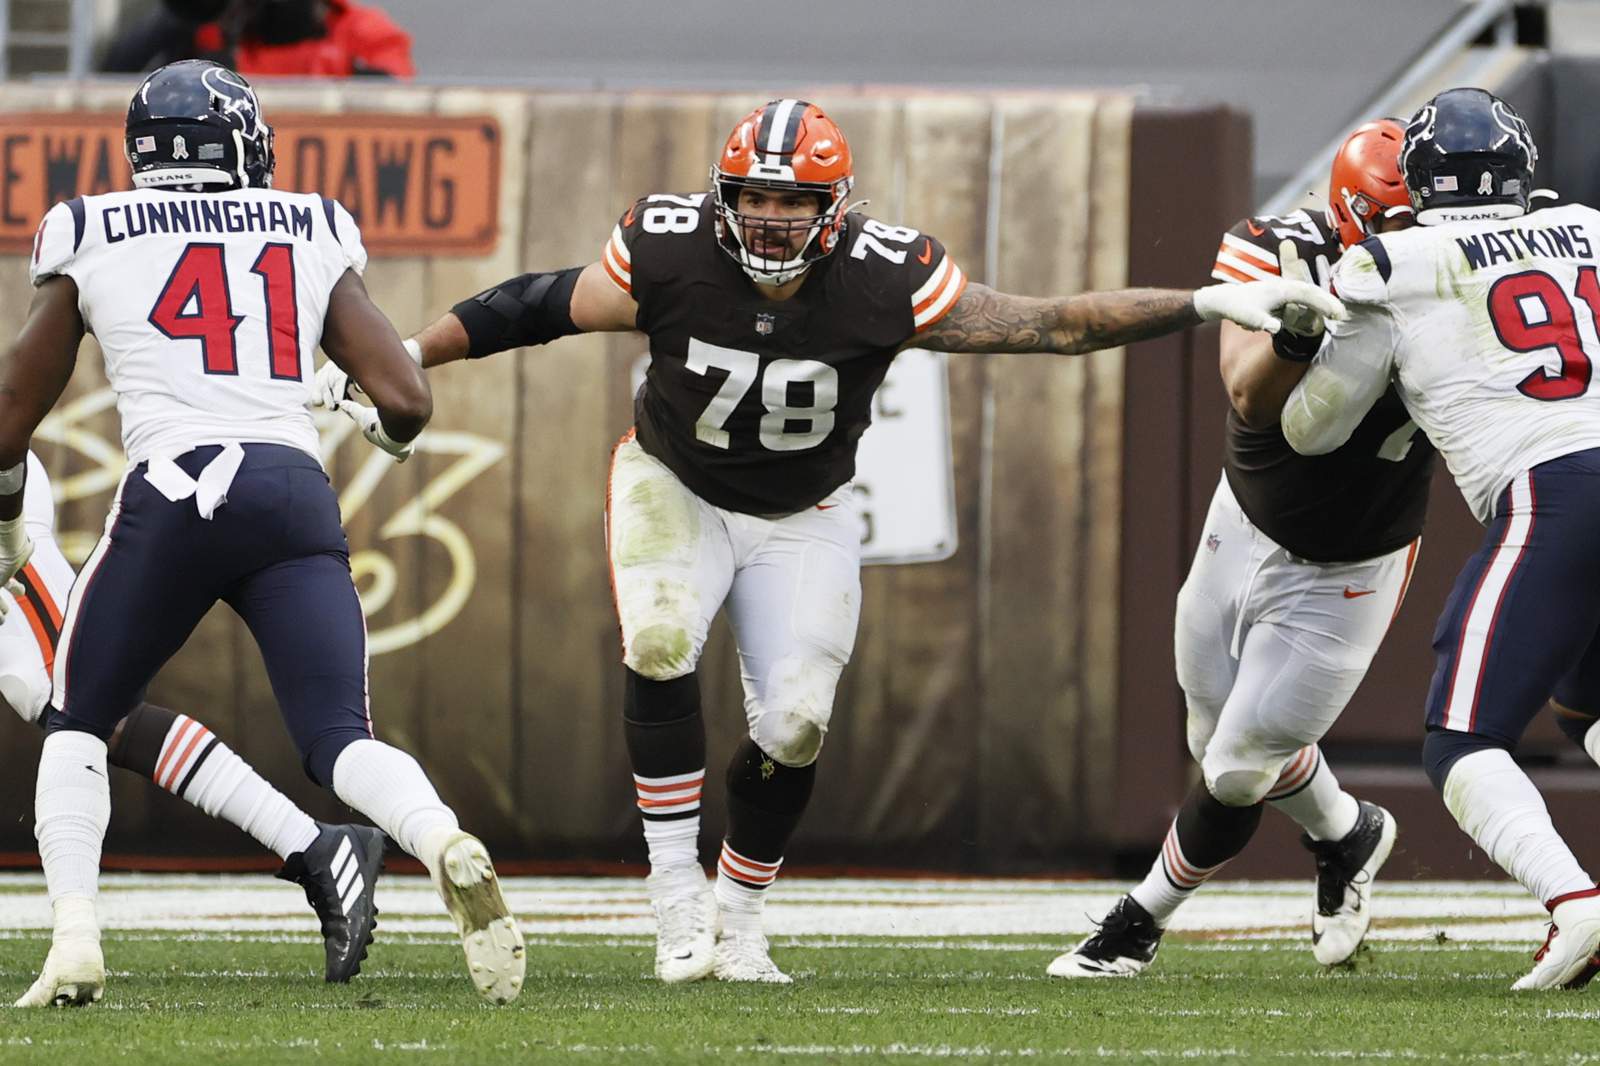 Browns place 3 more on COVID list, Garrett kept home "sick"